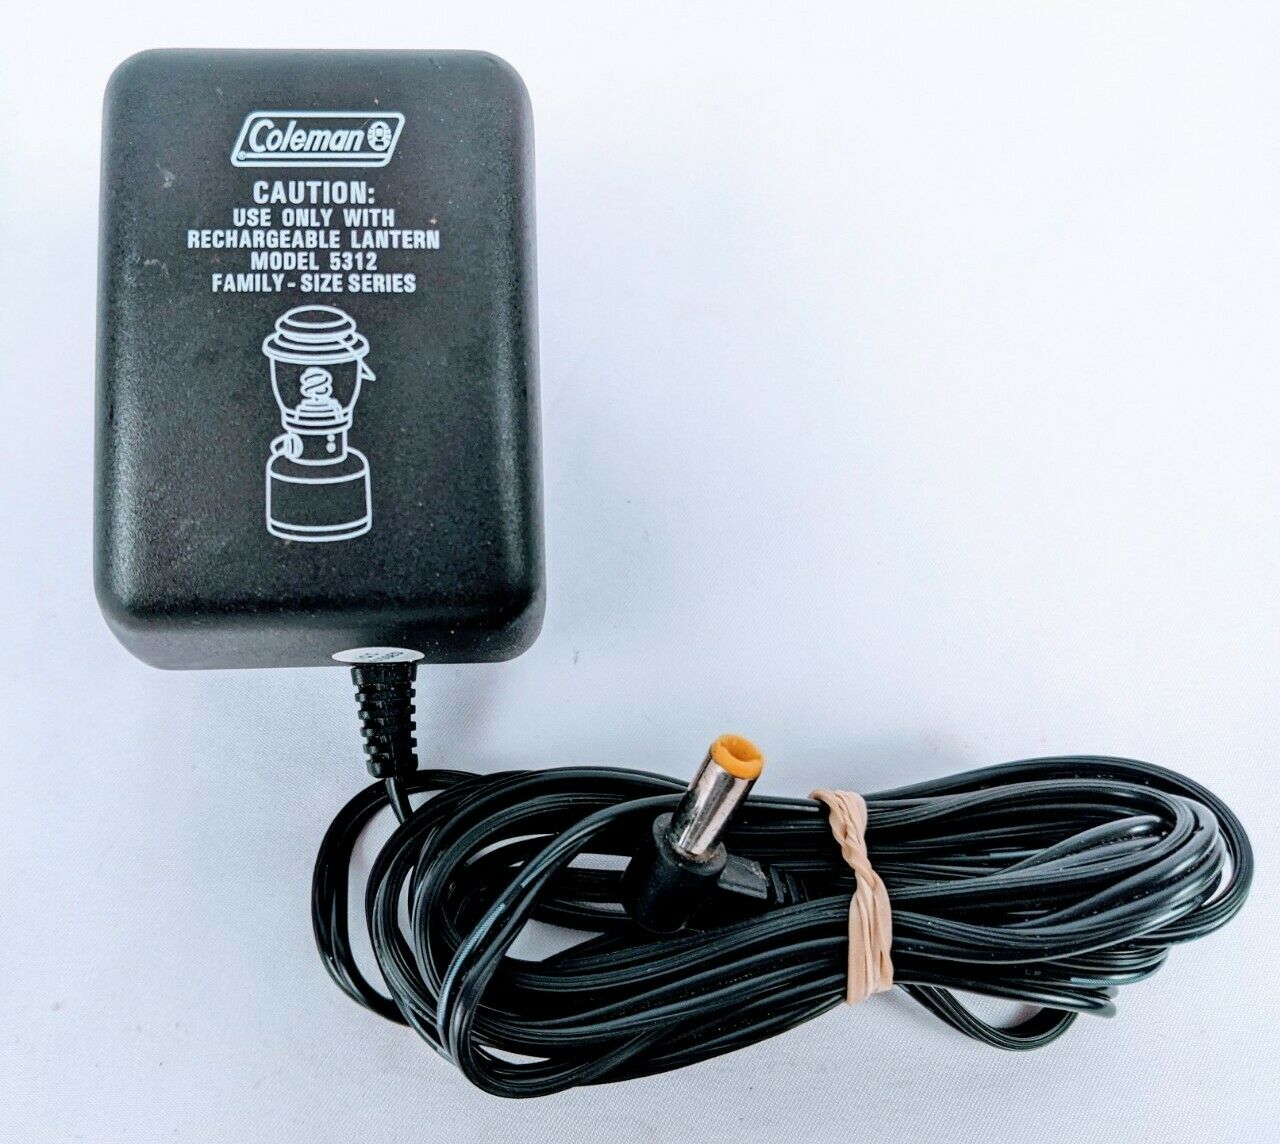 Coleman AC Charger Adapter UD4120135040G for model 5312 Lantern. 13.5VDC. 400mA. Brand: Coleman Type: Adapter MPN: